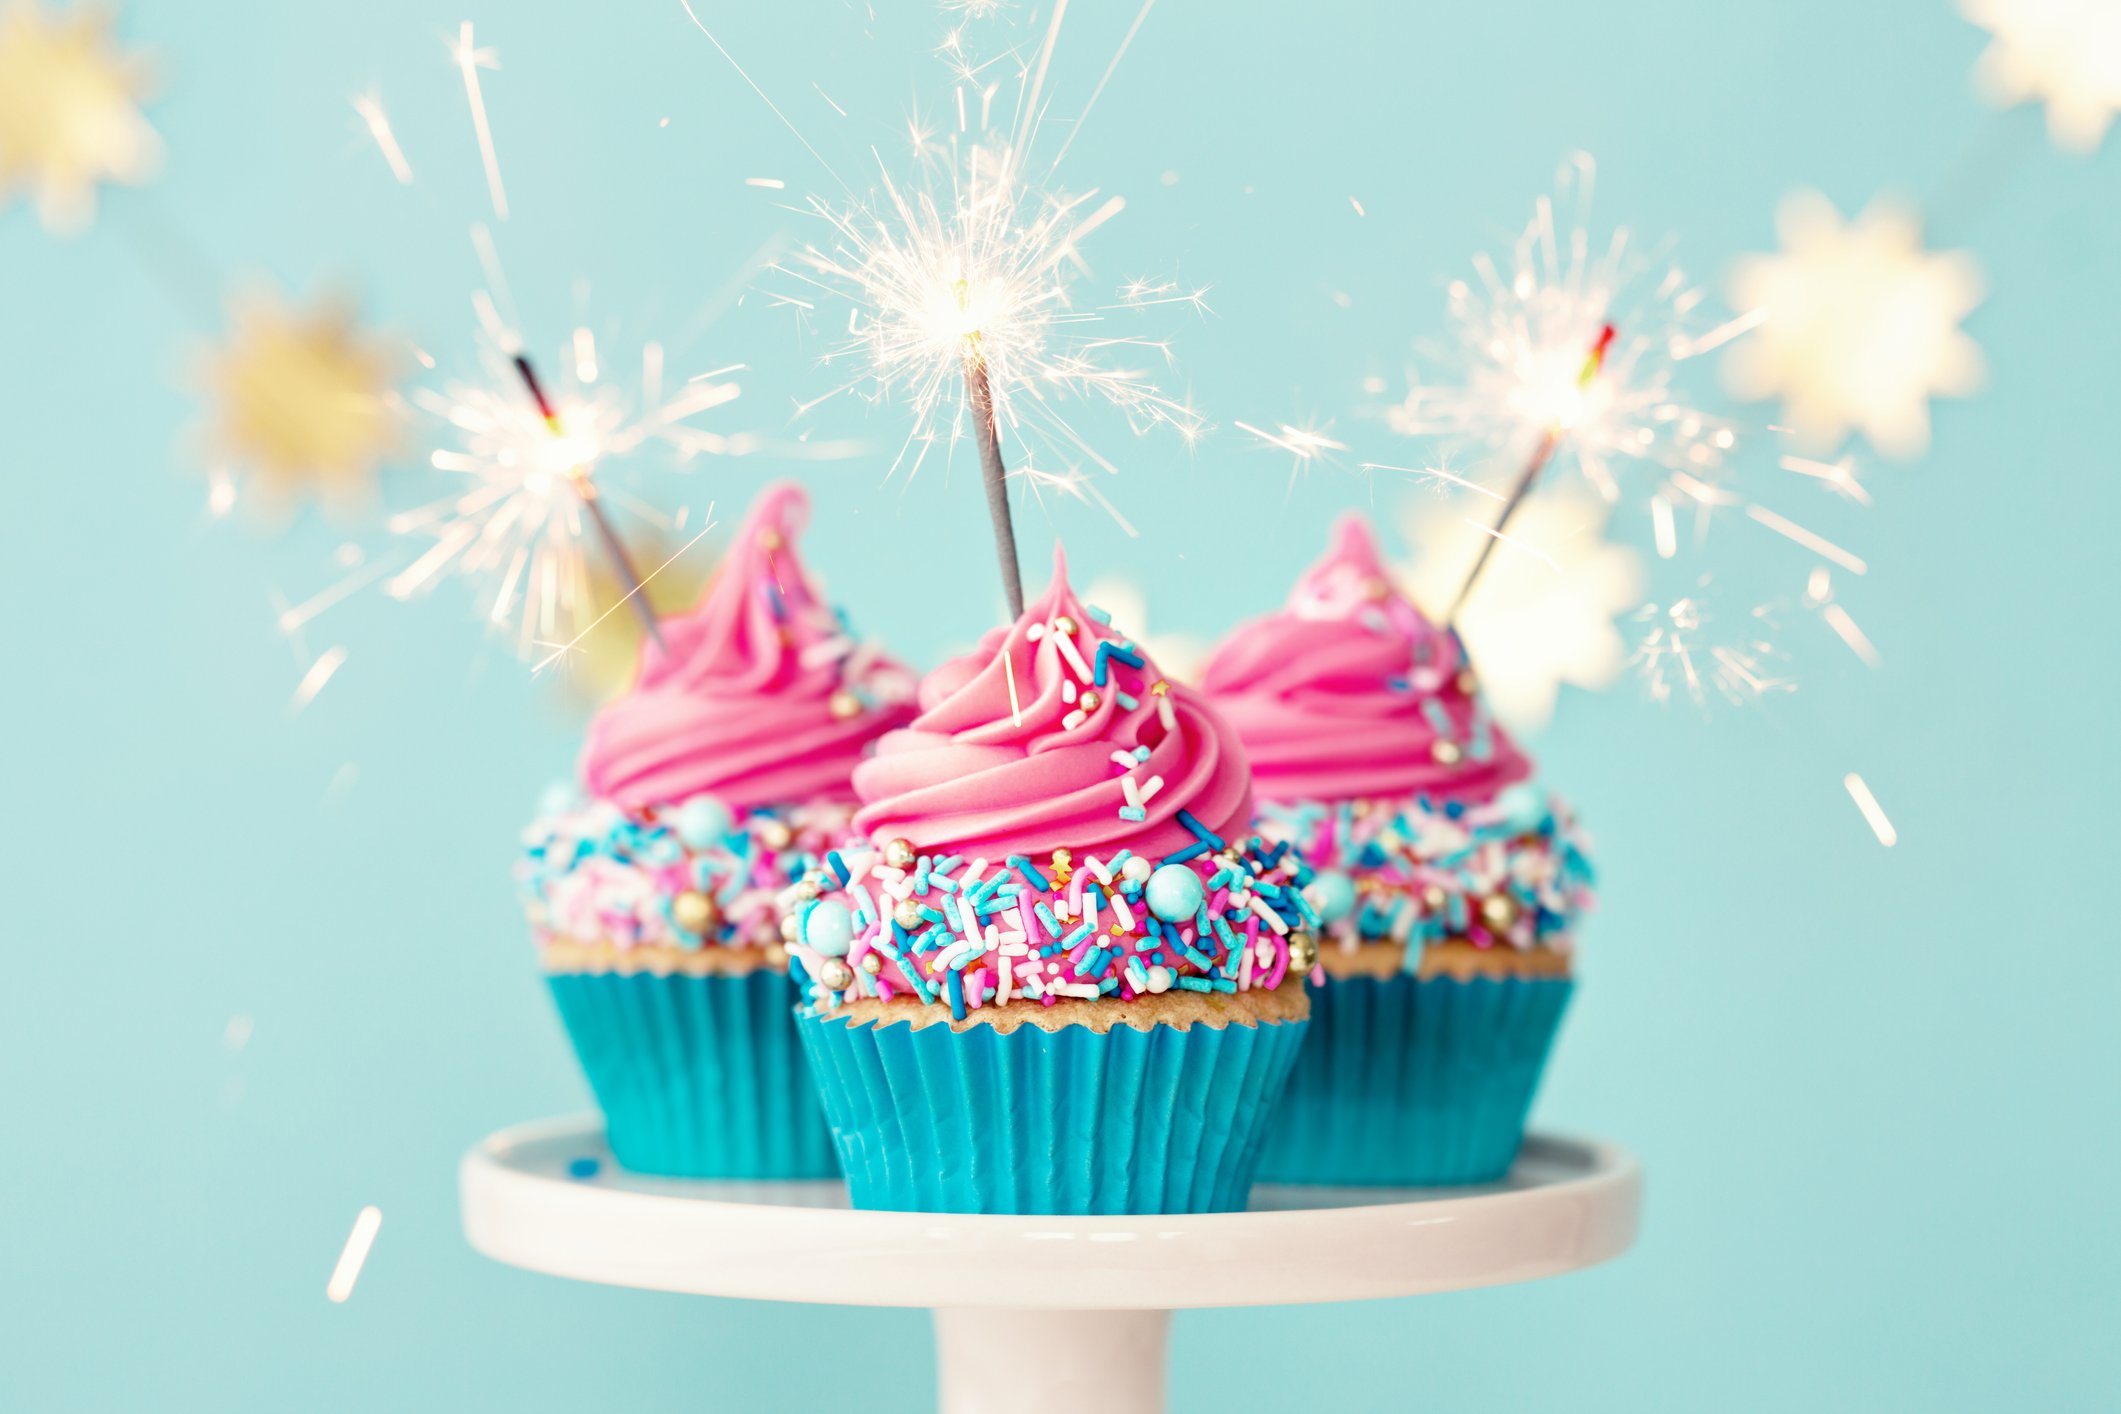 B.A. Schrock Financial Group | 3 Birthdays You Need to Know for Your Retirement Accounts